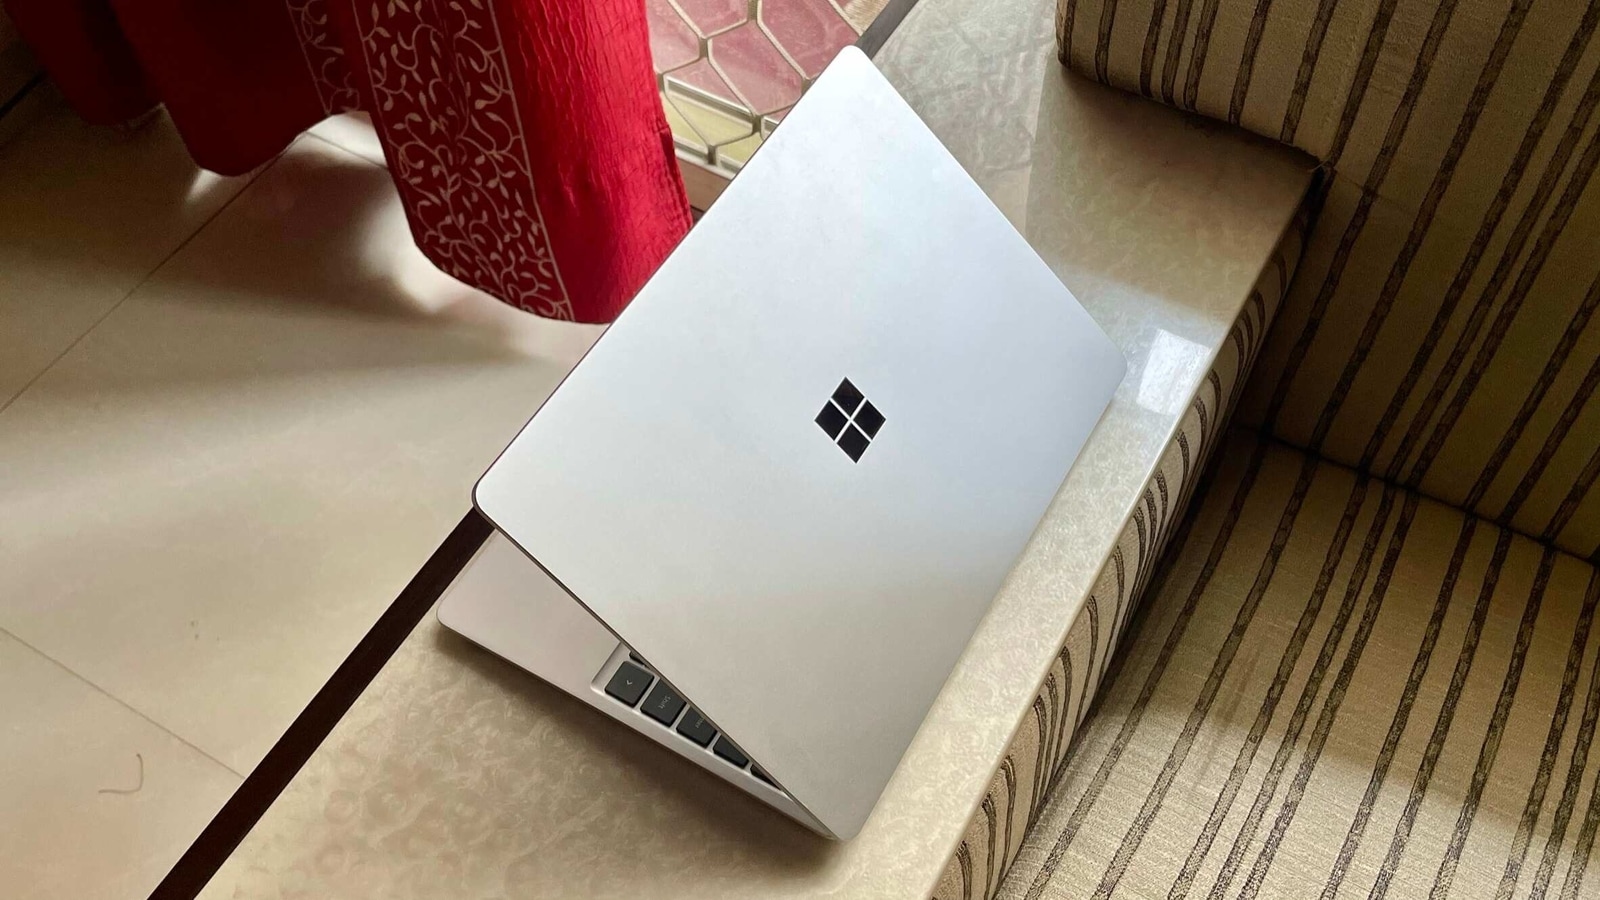 Microsoft Surface Laptop Go 2 Price, Specs, and Release Date